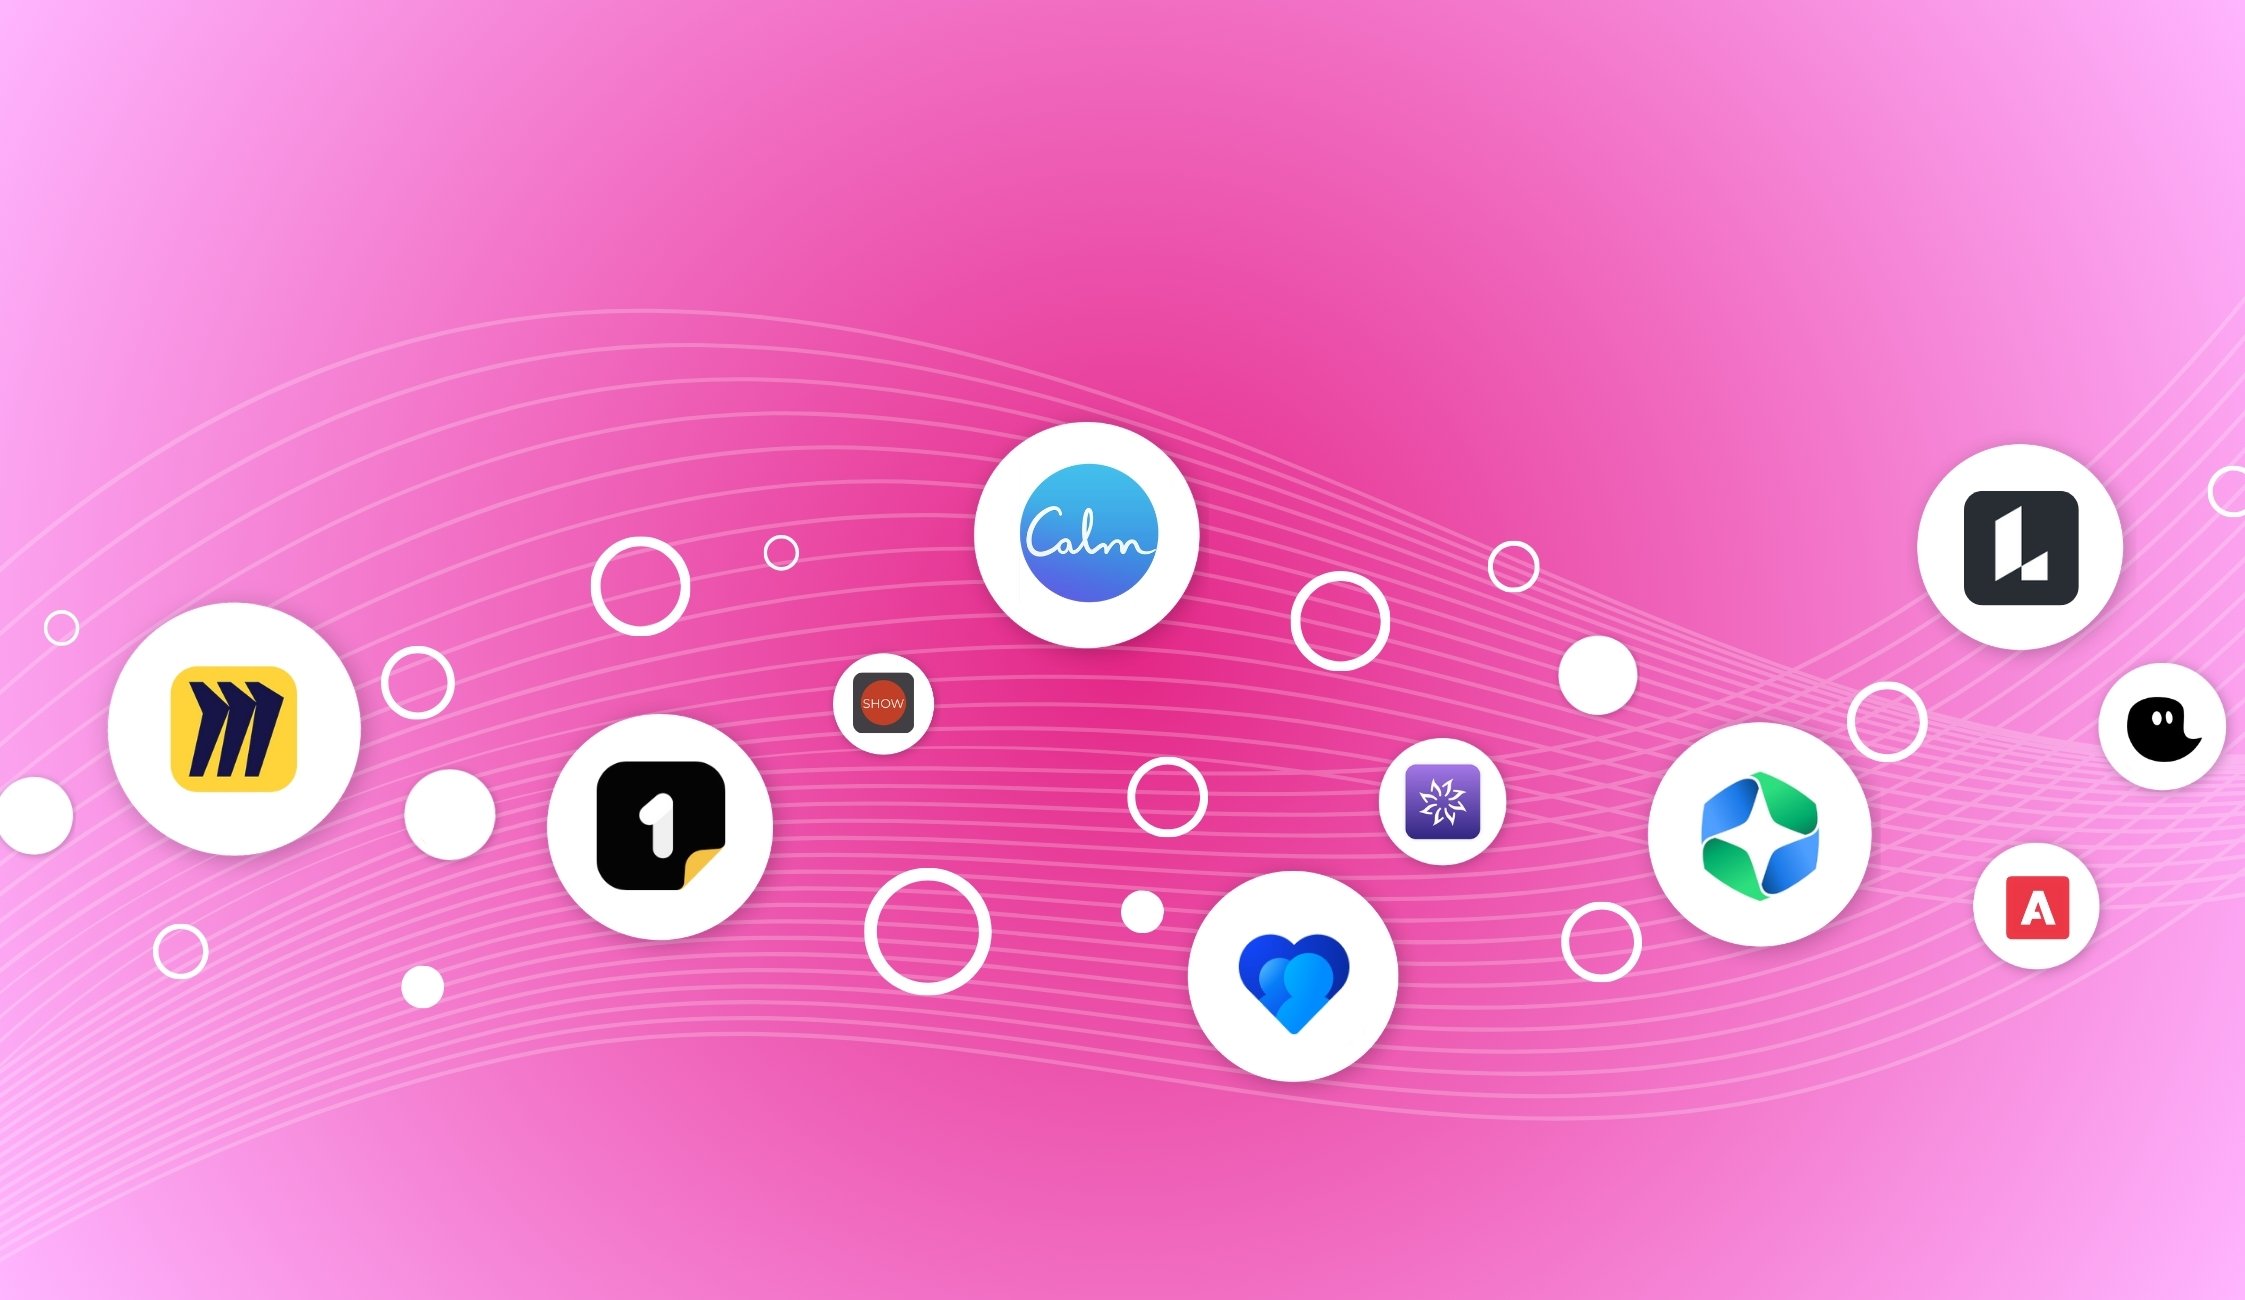 Microsoft Teams Apps Logos on a pink background